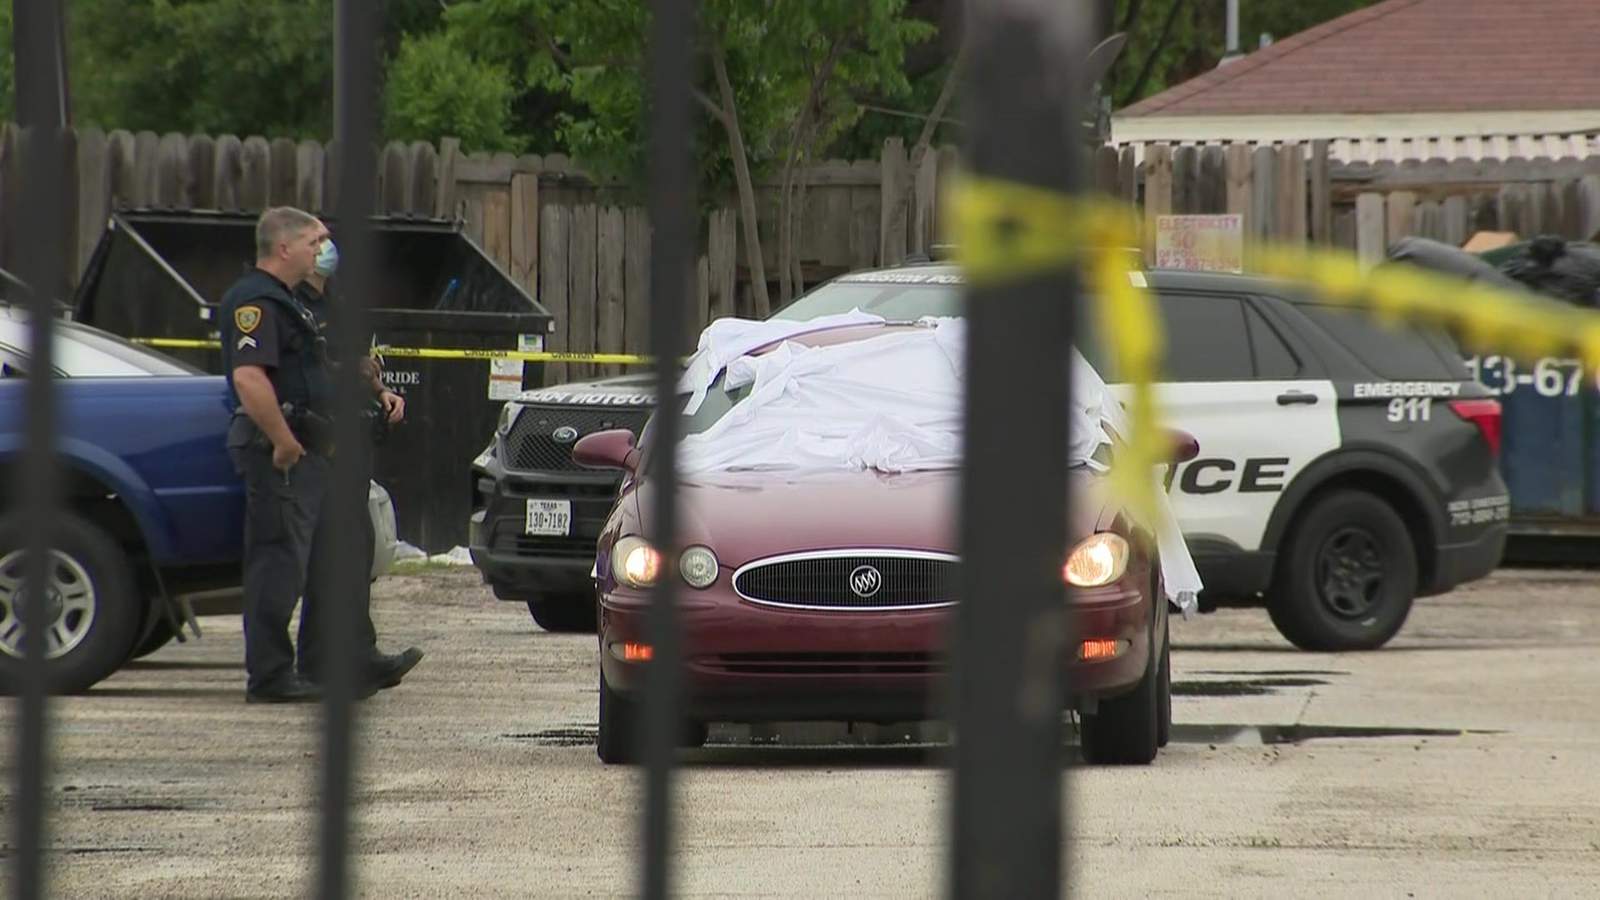 2 found dead after reports of shooting at southeast Houston apartments